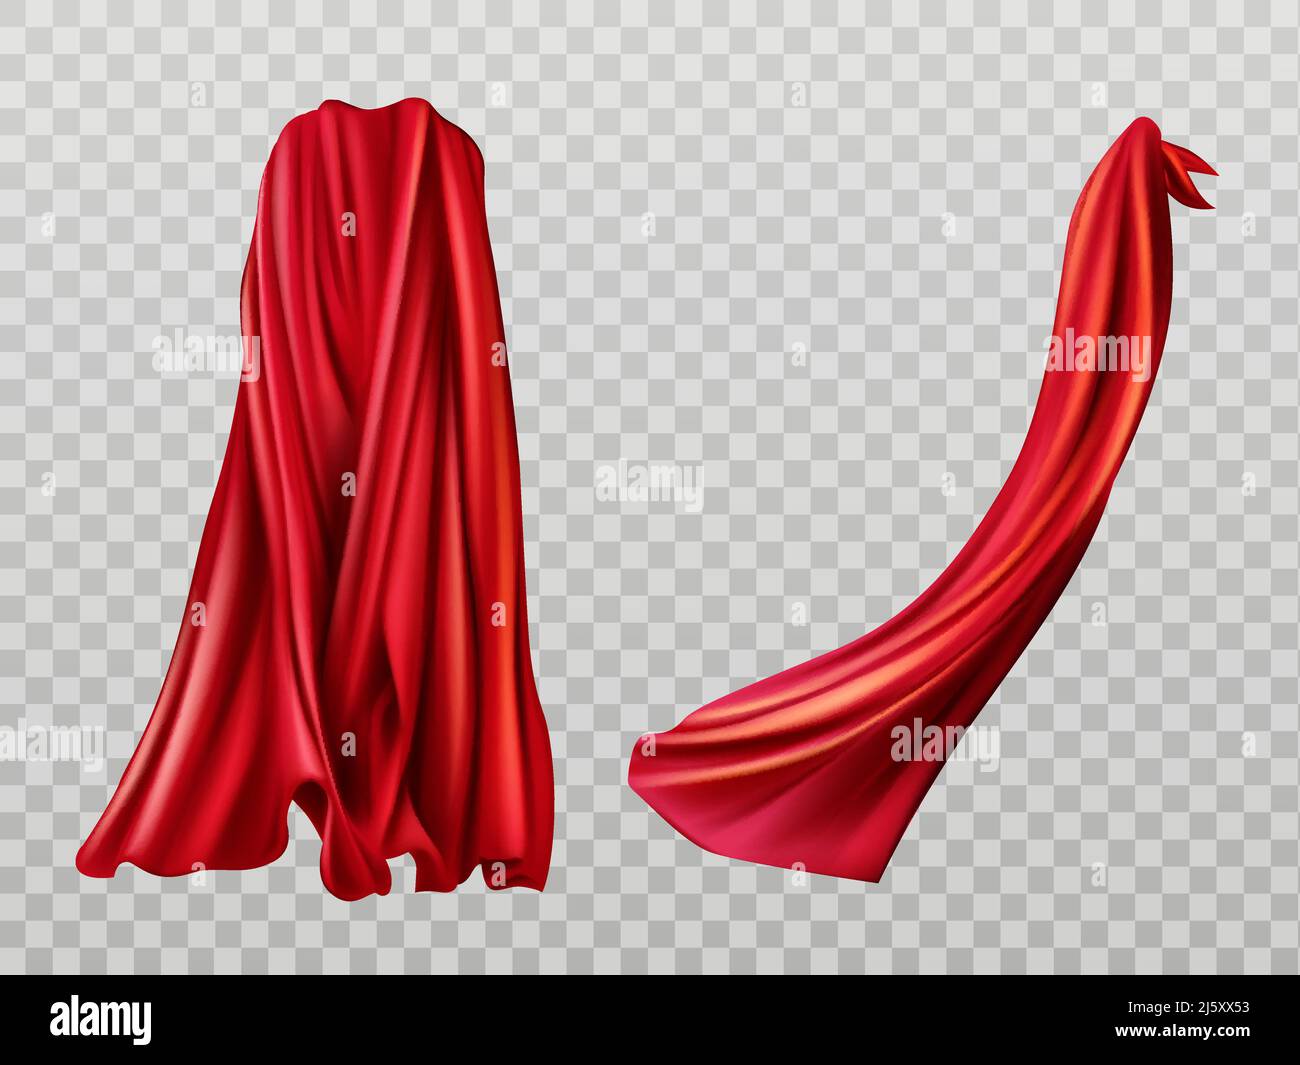 Red cloaks set. Silk flattering capes back and side view isolated on transparent background. Carnival, masquerade dress, superhero costume design elem Stock Vector